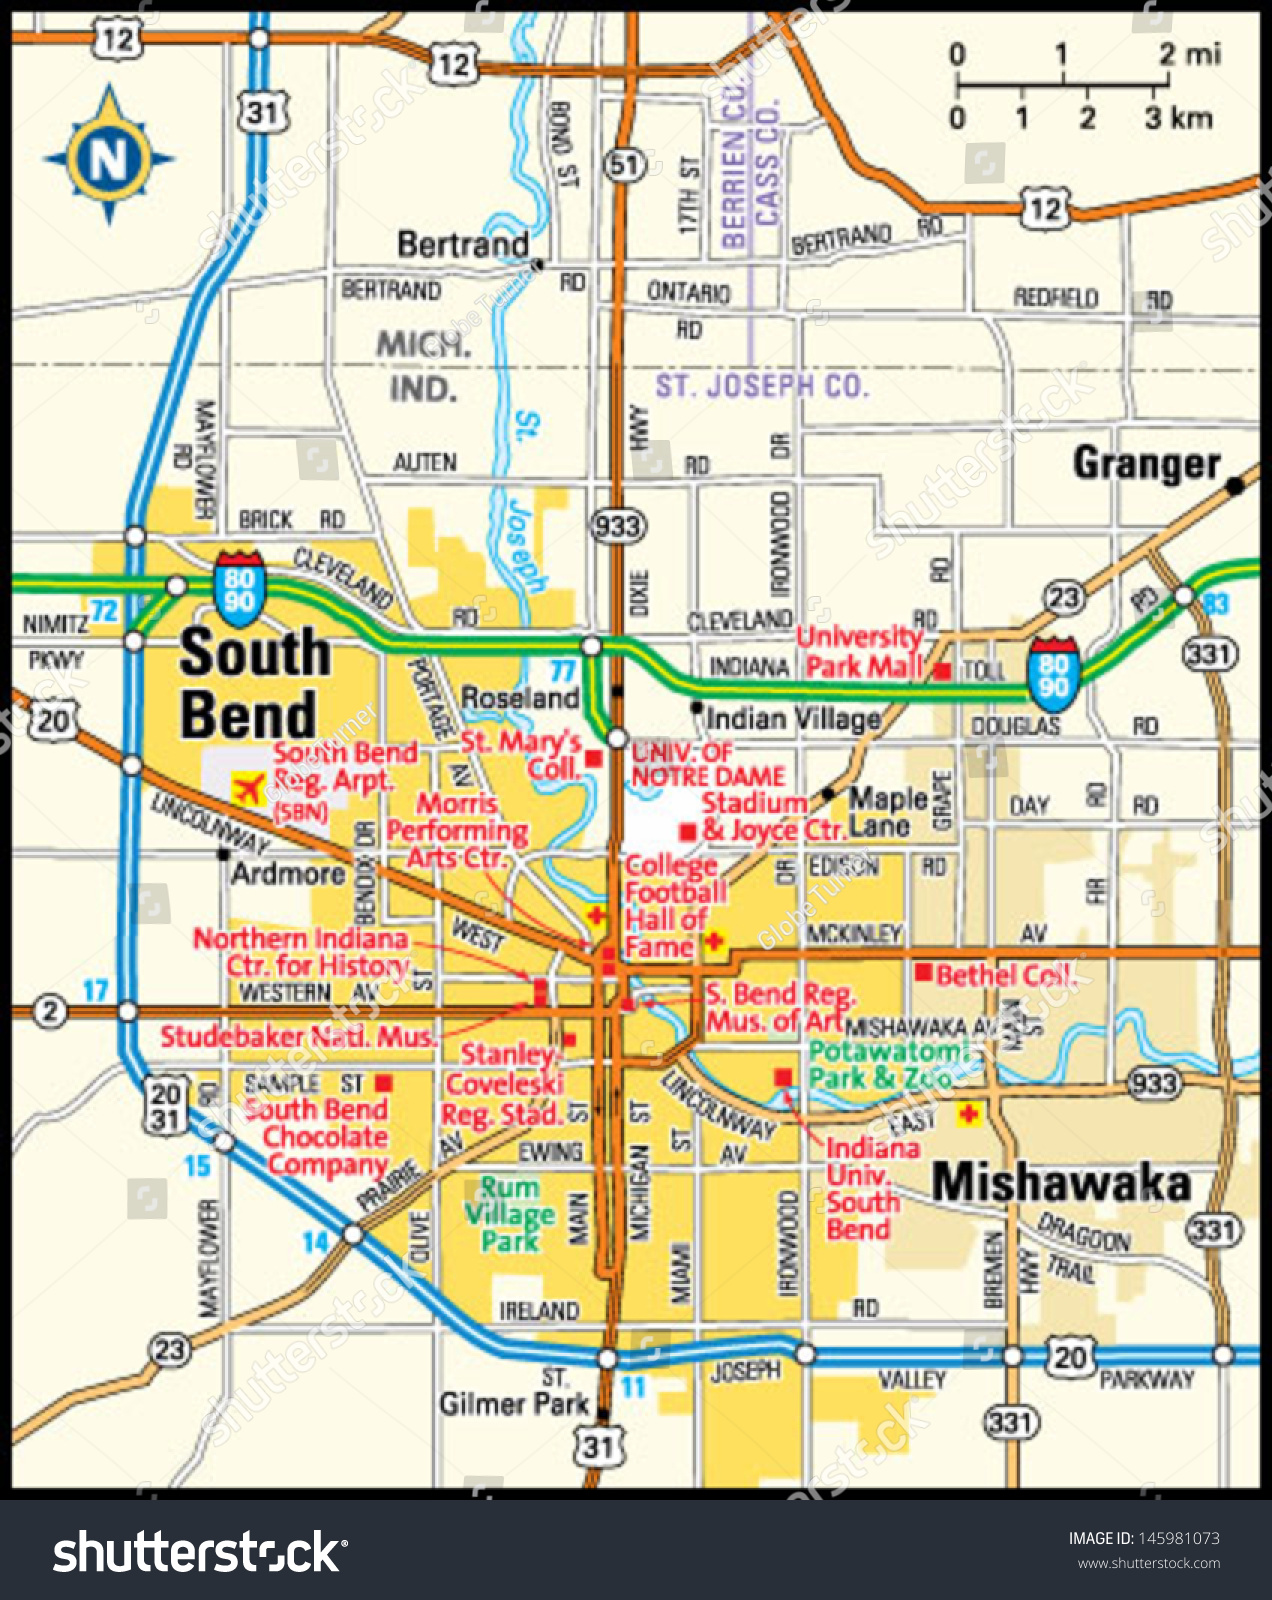 South Bend City Limits South Bend Indiana Area Map Stock Vector (Royalty Free) 145981073 |  Shutterstock